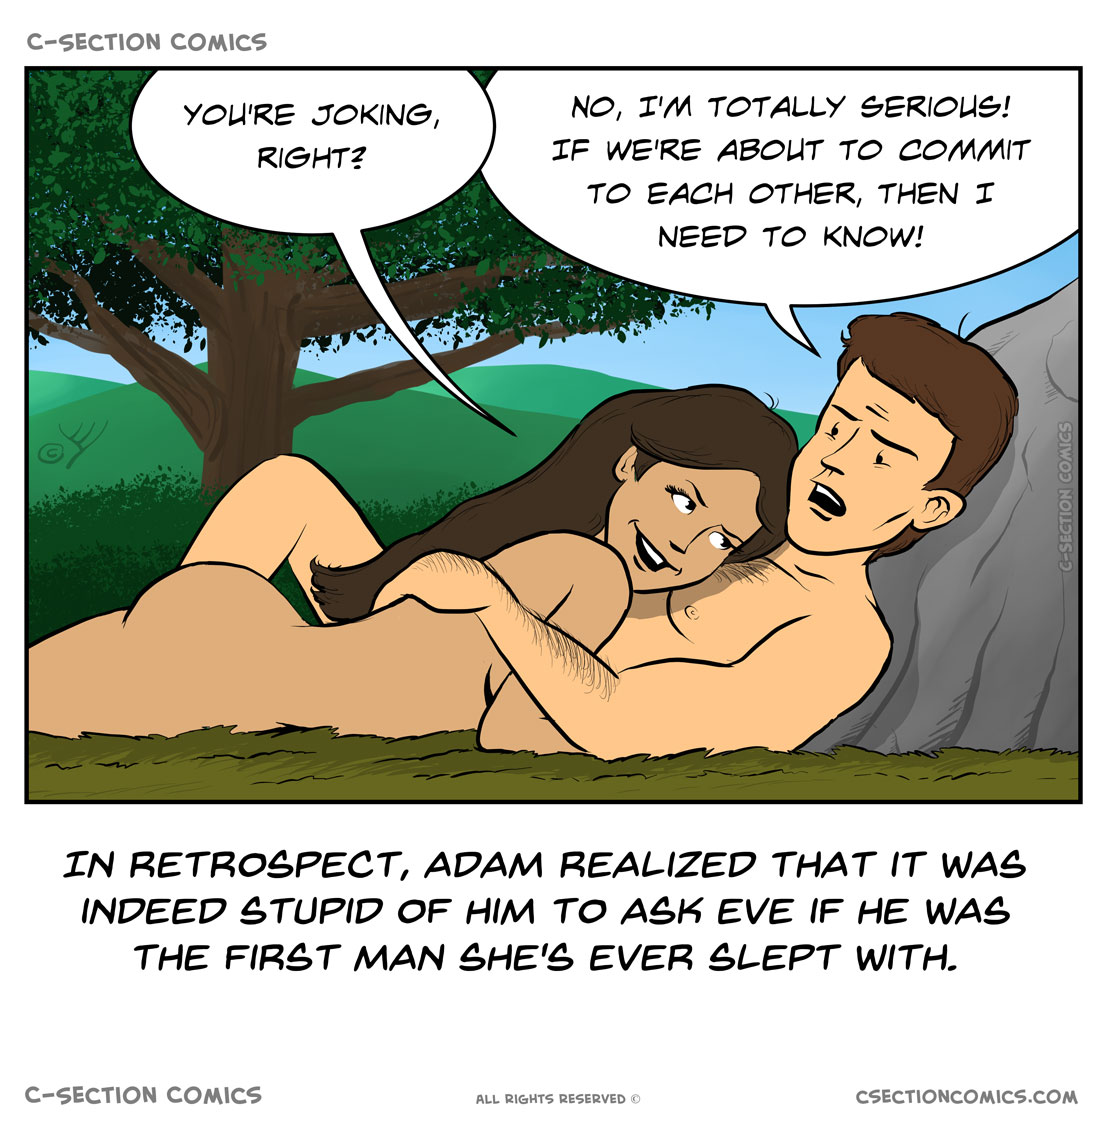 Her First - by C-Section Comics